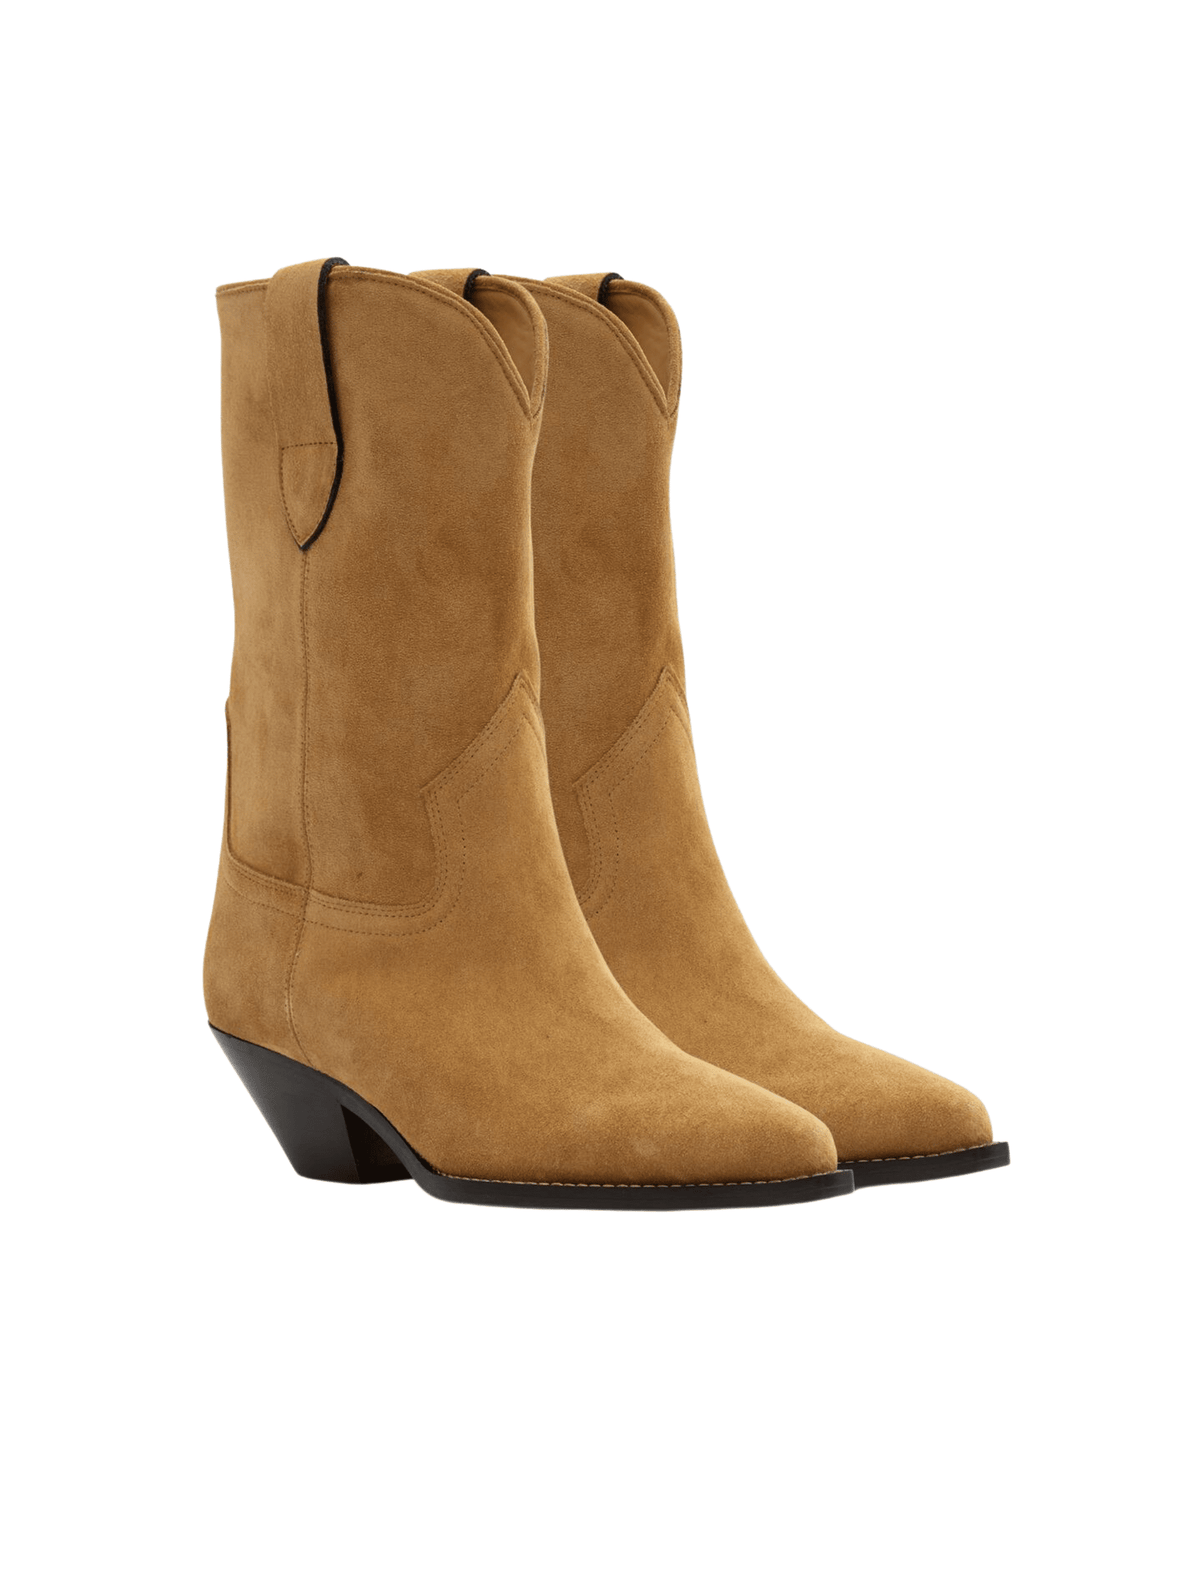 Dahope / Taupe Womens Isabel Marant 